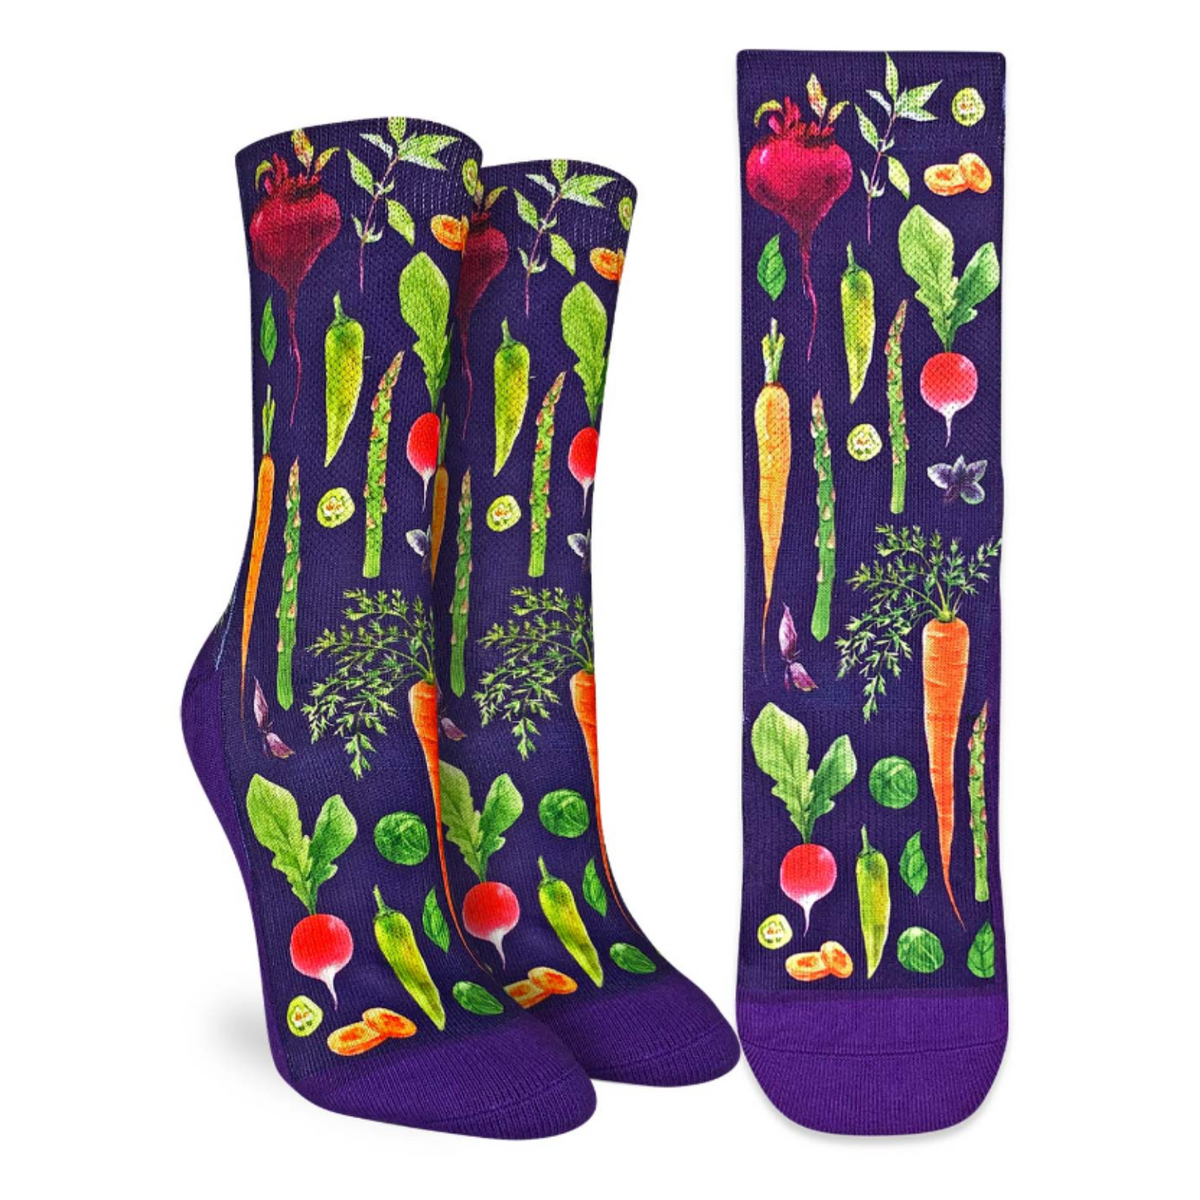 Good Luck Sock Veggies women&#39;s sock featuring purple crew sock with beets, asparagus, carrots, radishes and more on display feet